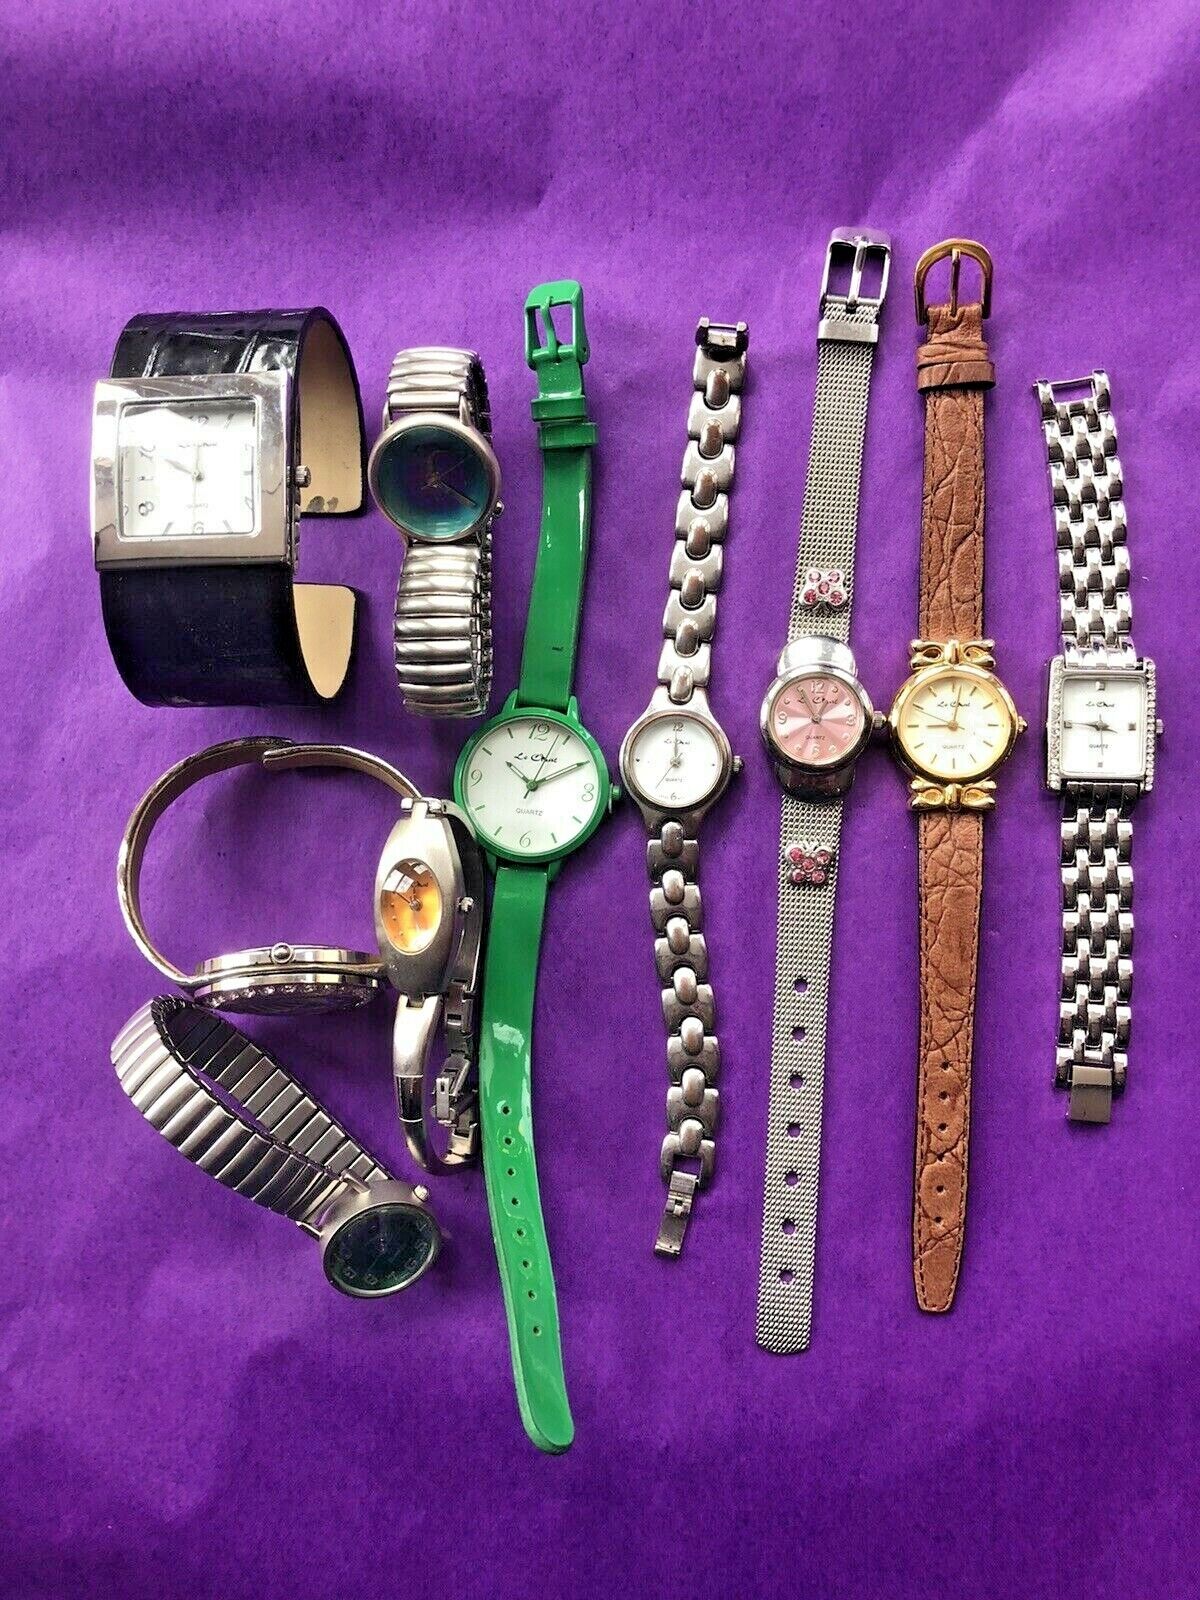 "LE CHAT", Chateau Fashion Watches - Lot 4 - Untested (Ten Watches) (U/L4/I.76)